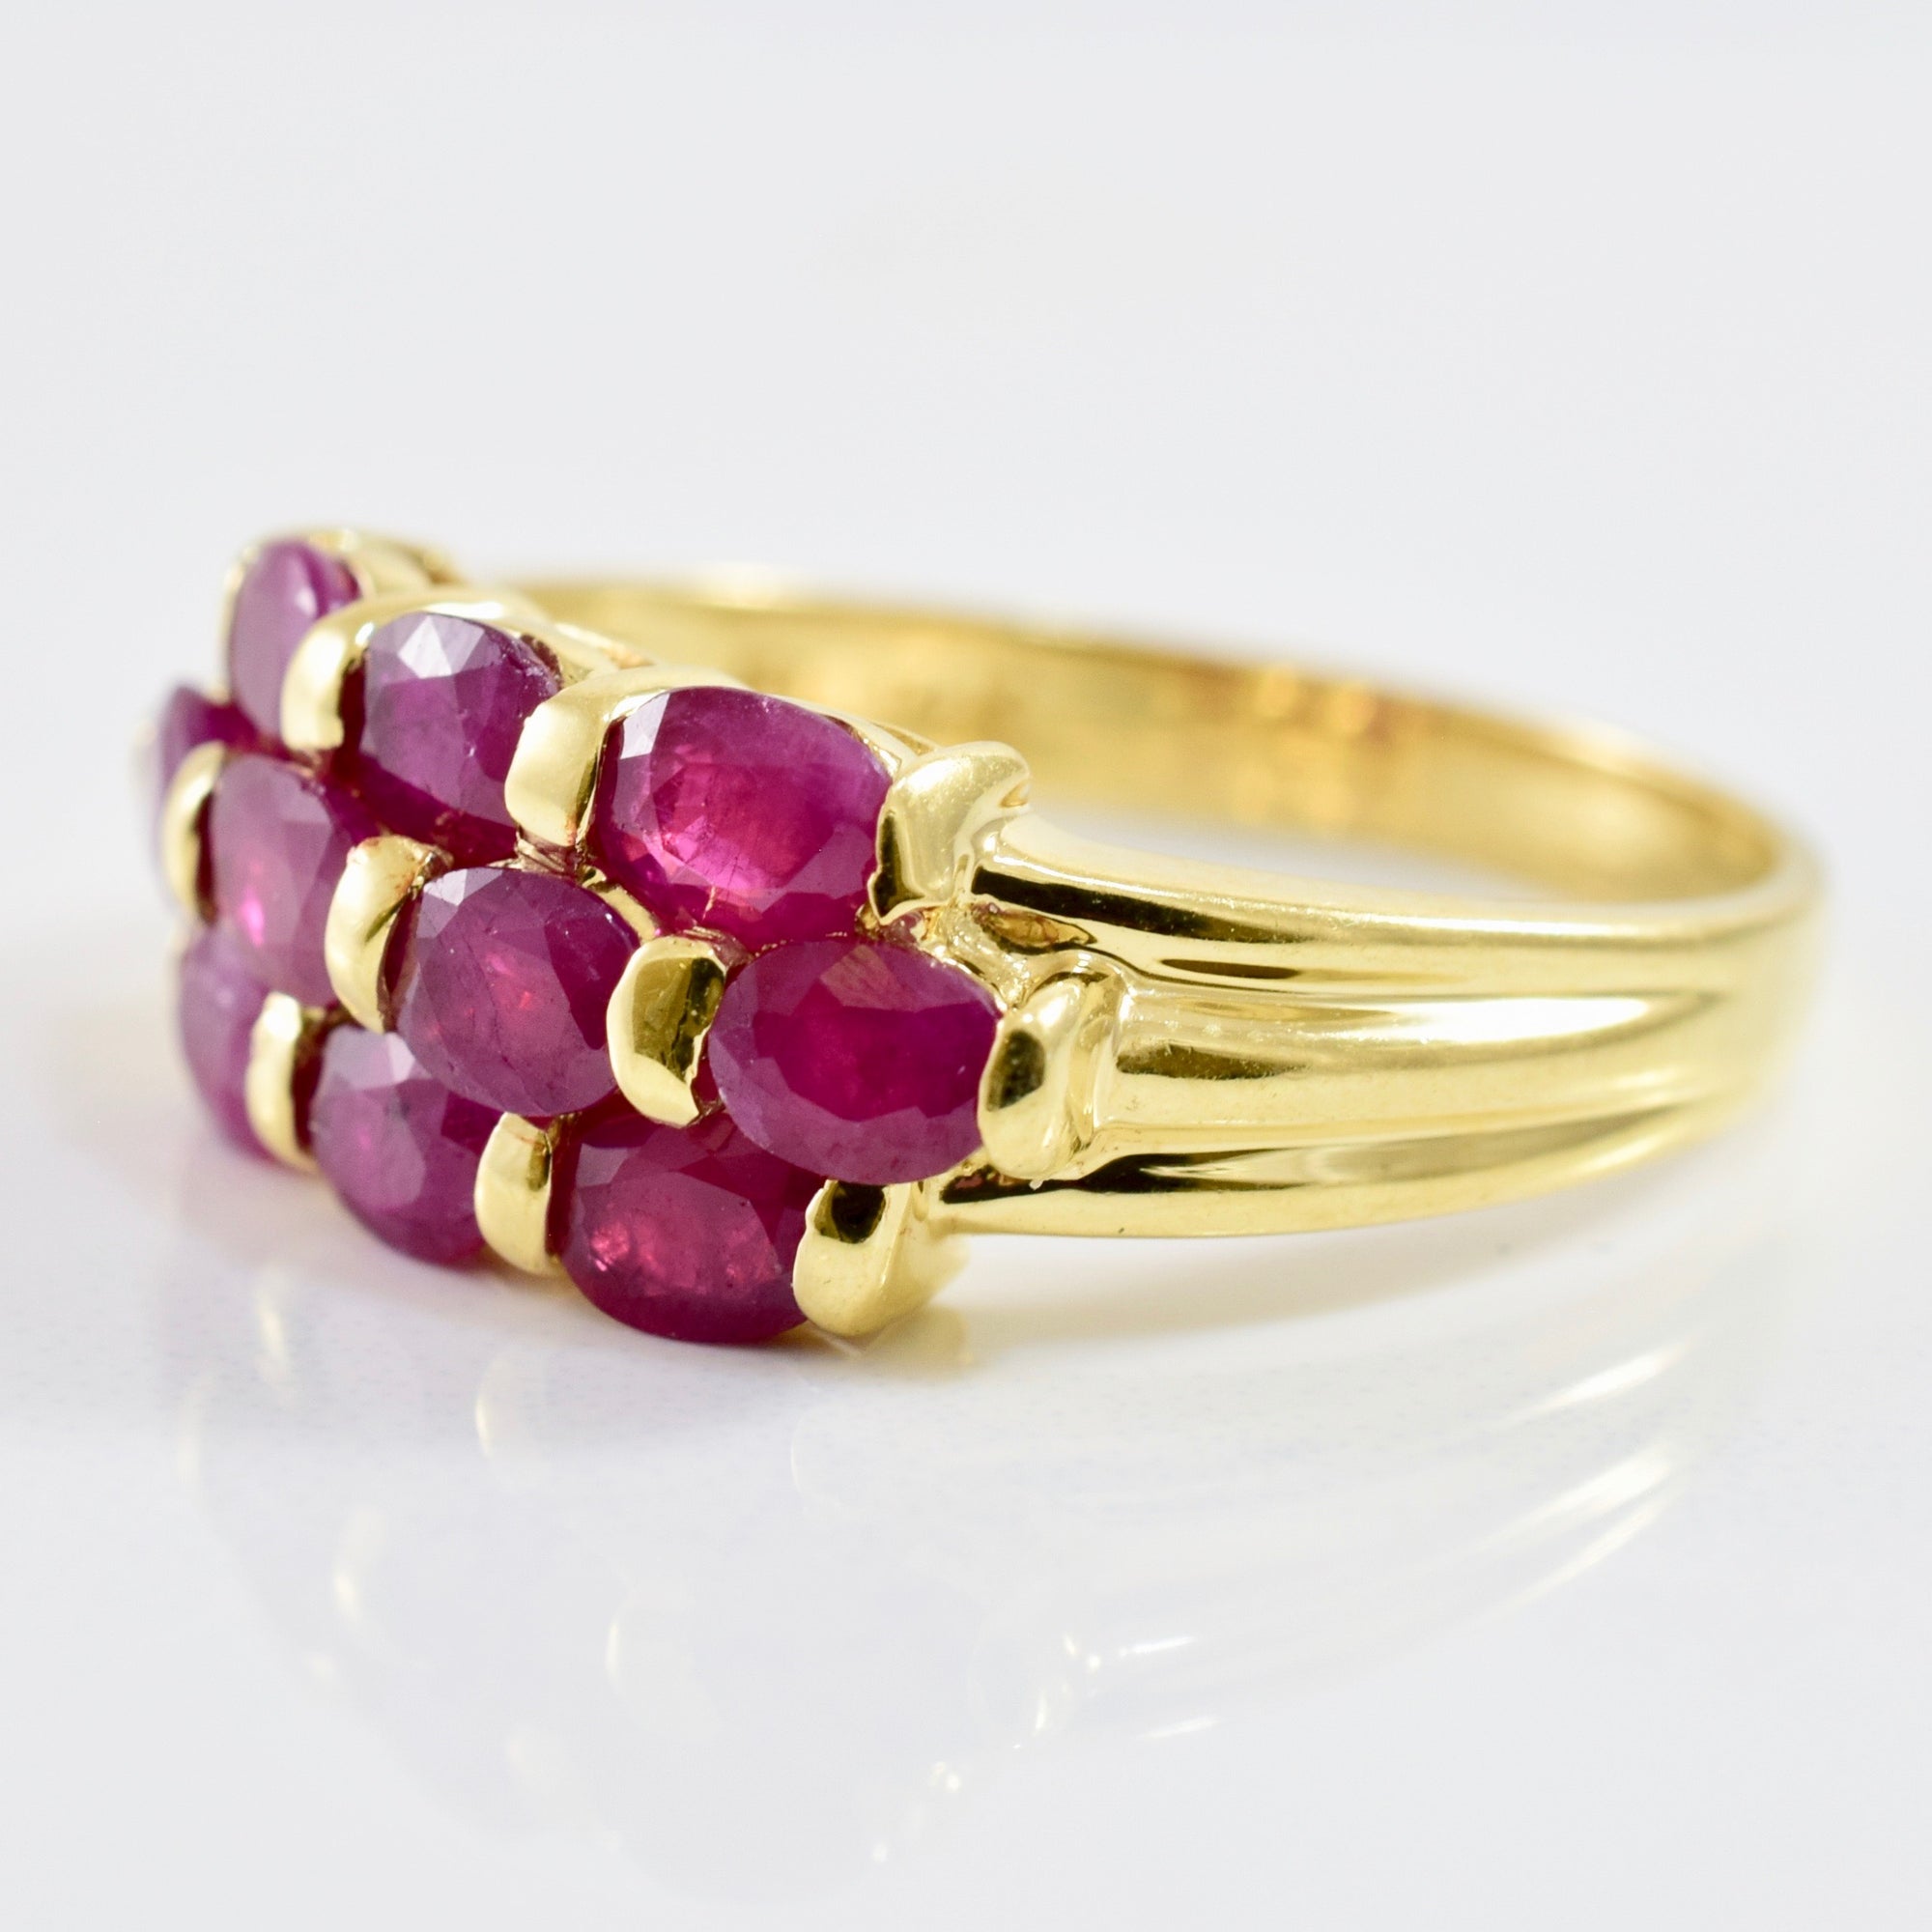 Ruby Cluster Ring | SZ 9 |